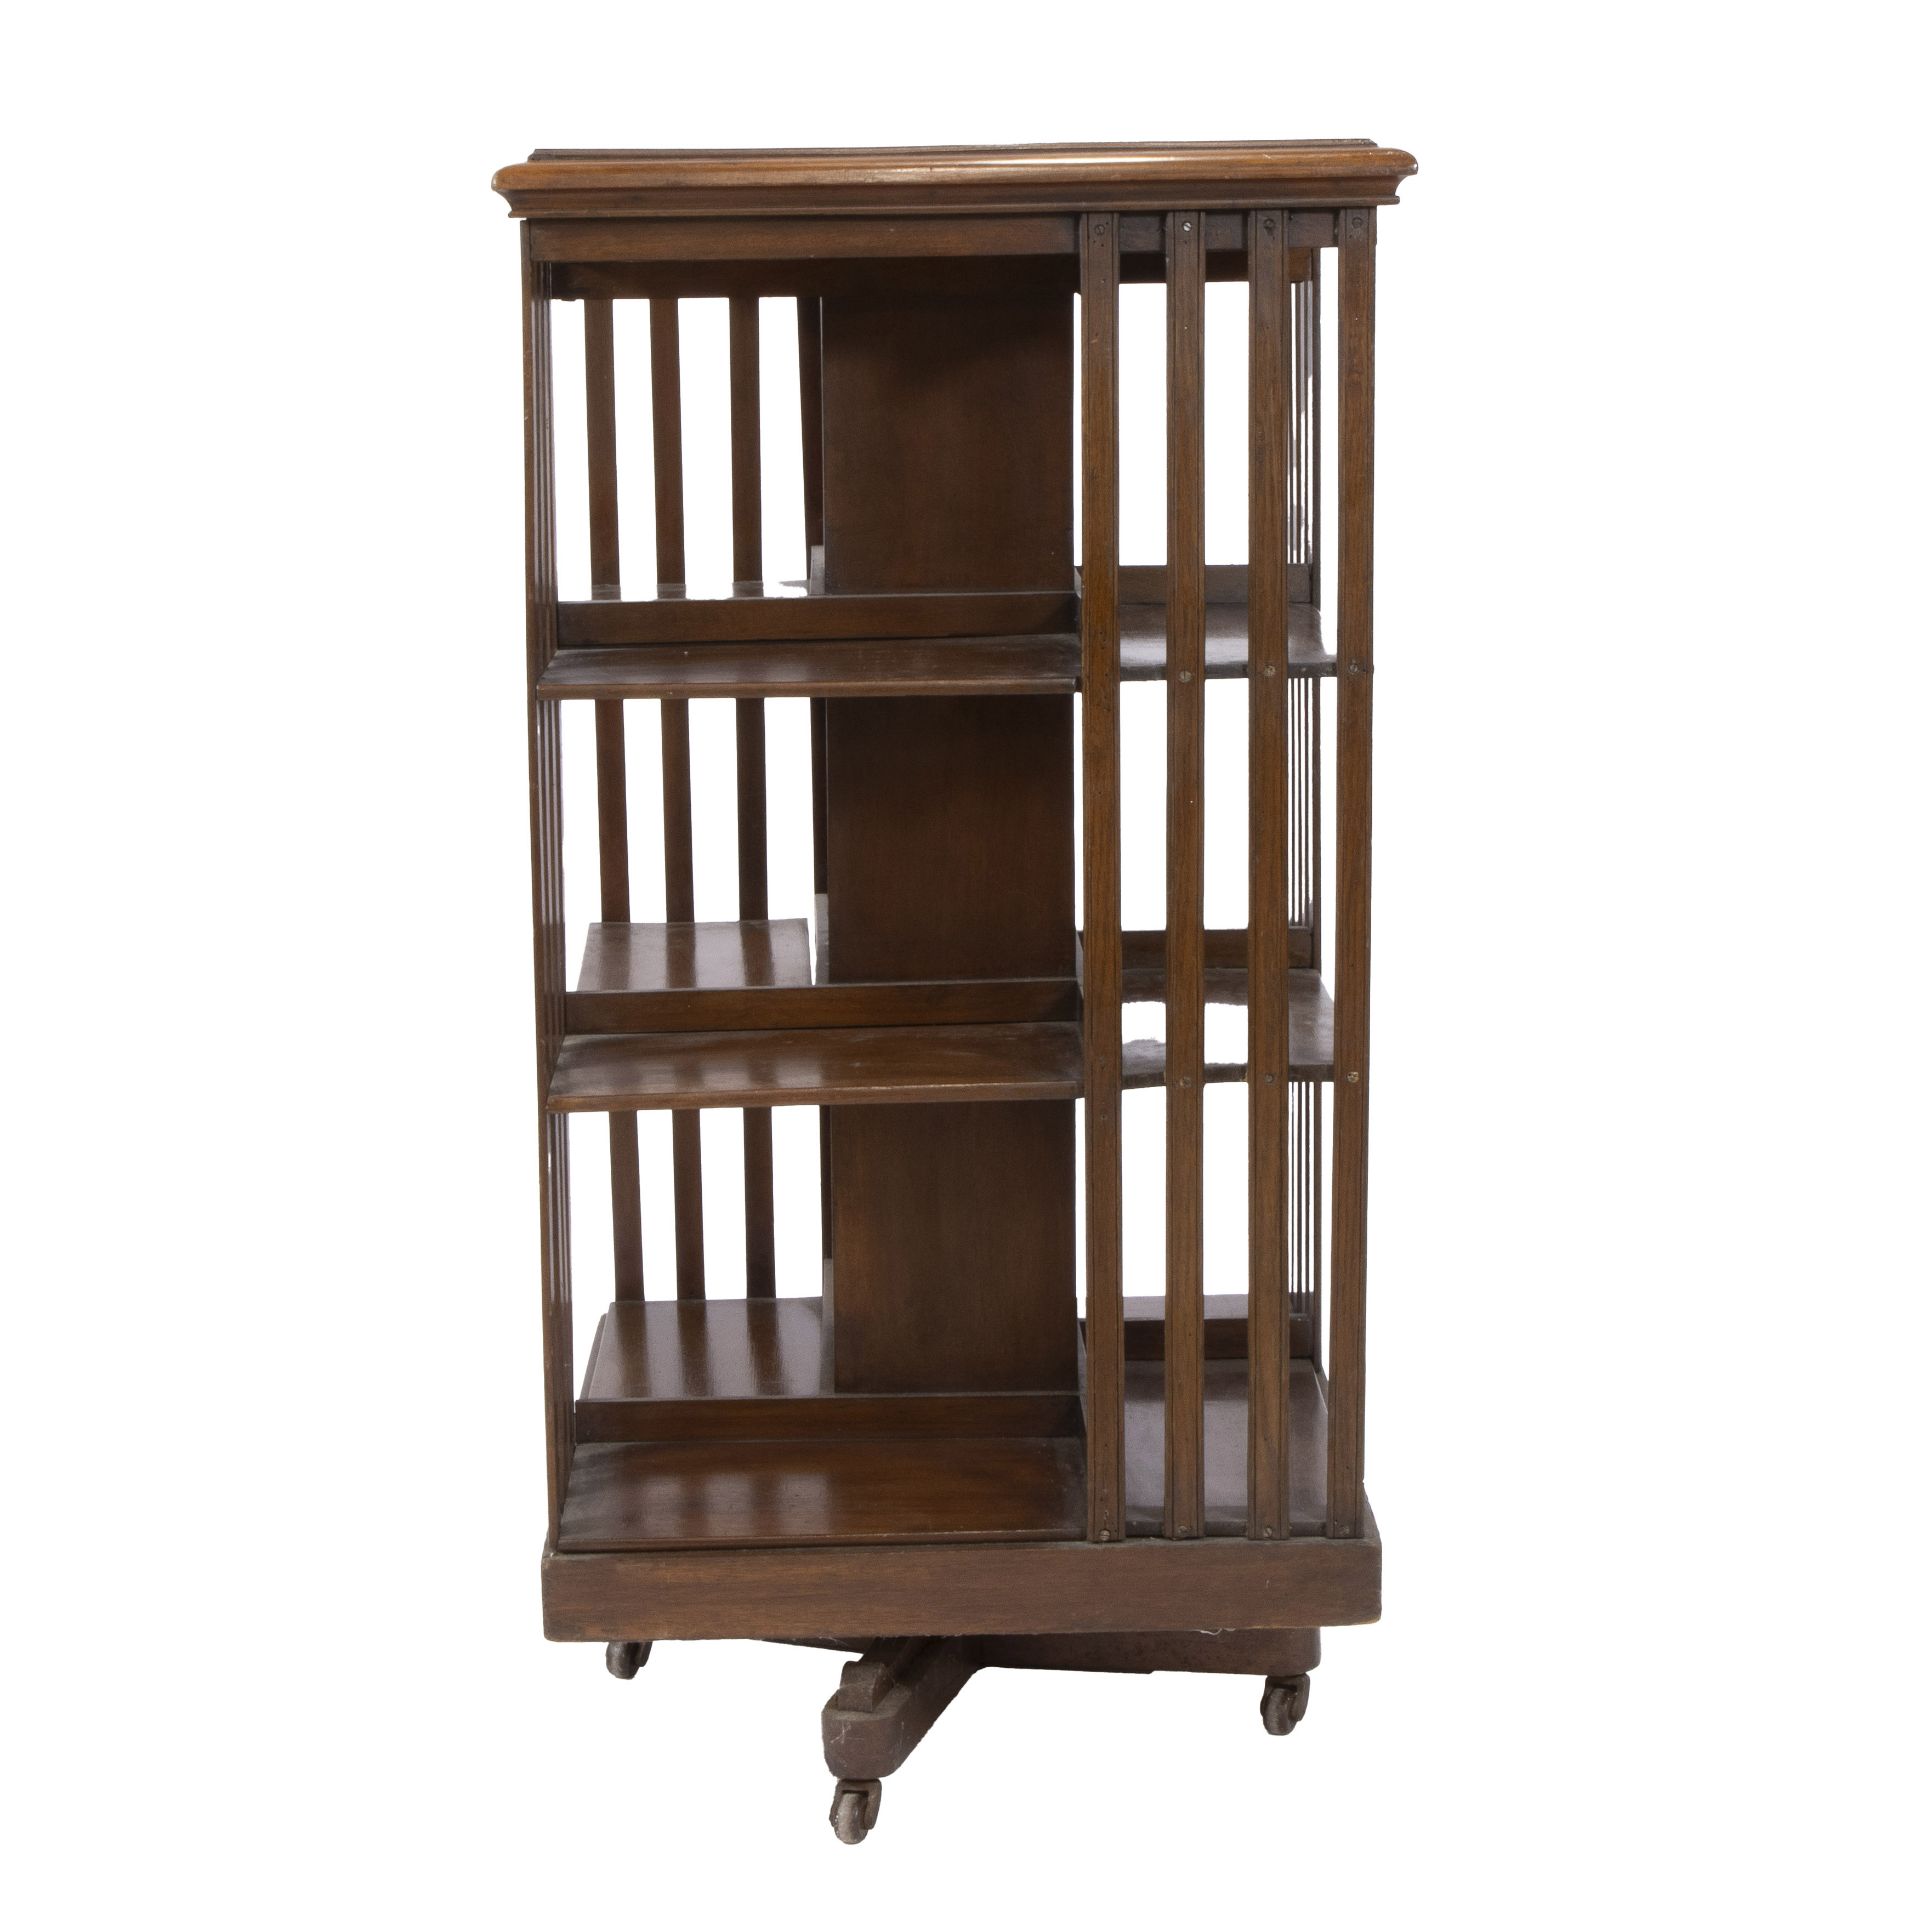 English oak bookmill with 3 levels and resting on castors, early 20th century - Bild 3 aus 6